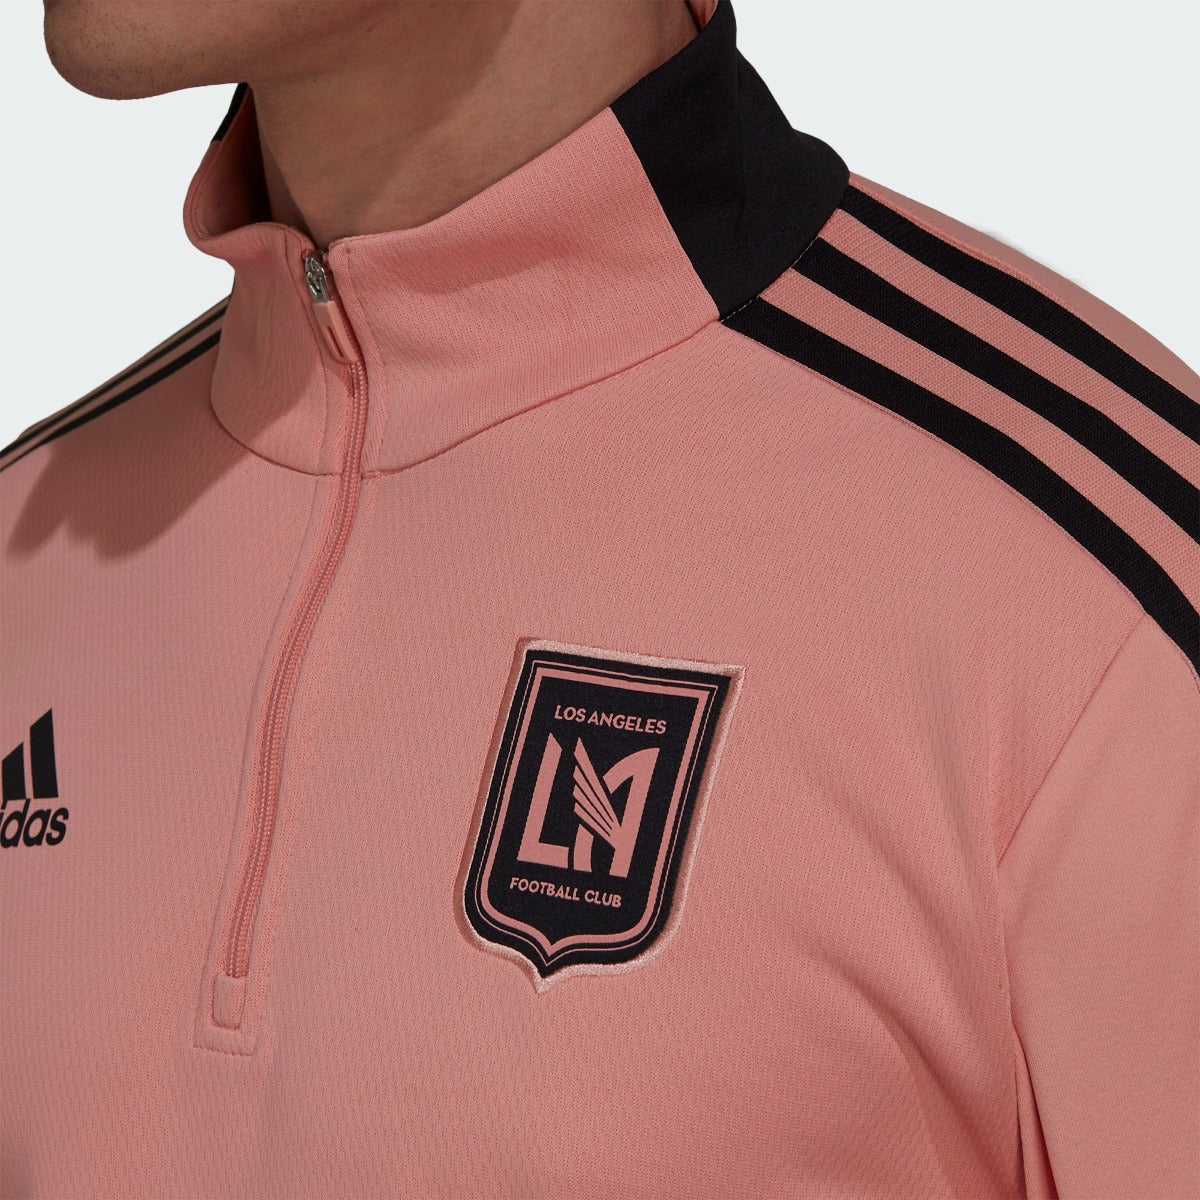 Adidas 2021-22 LAFC Warm-Up Top - Trace Pink (Detail 1)